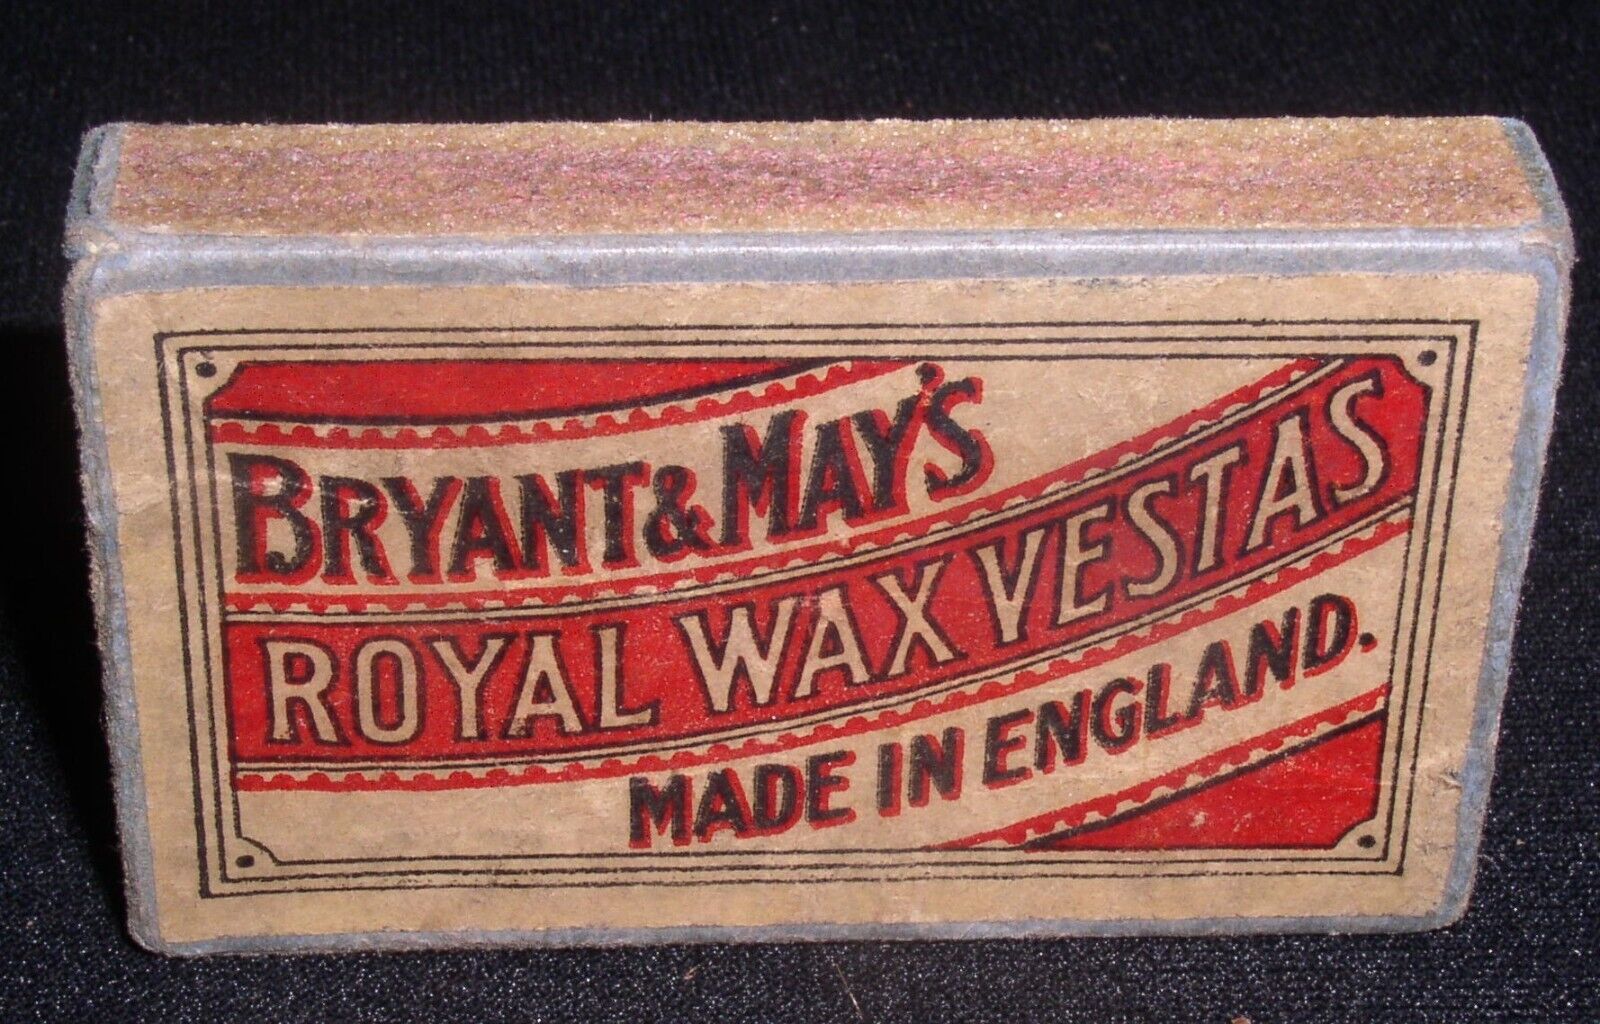 Royal Wax Vestas~Bryant & May\'s, Made in England empty Matchbox~3\